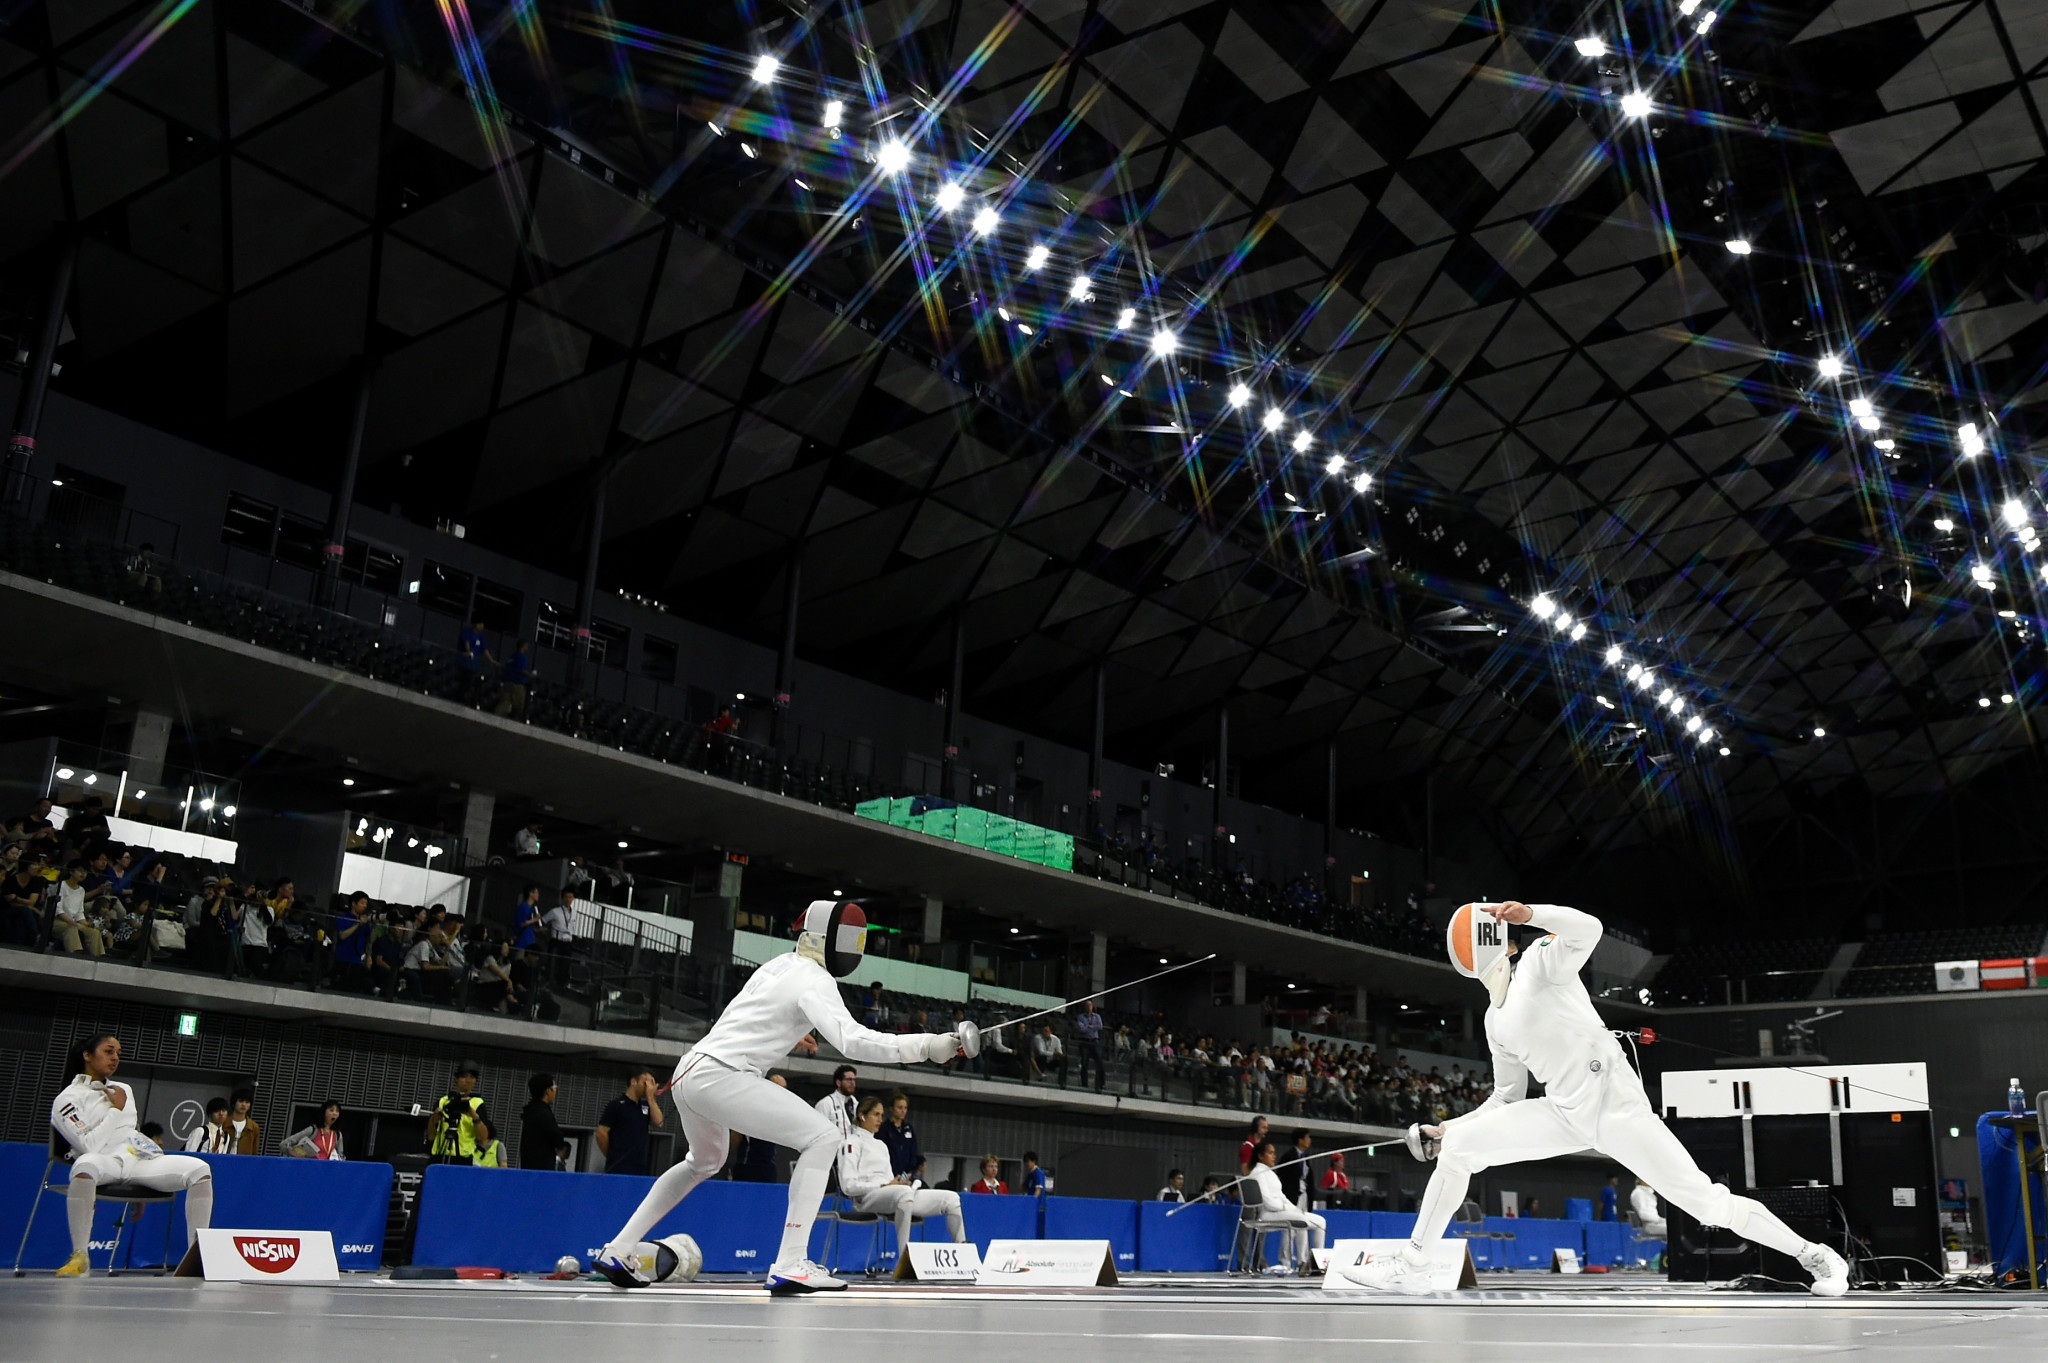 UIPM have been working with Absolute Fencing for several years, who have supplied their equipment ©Getty Images